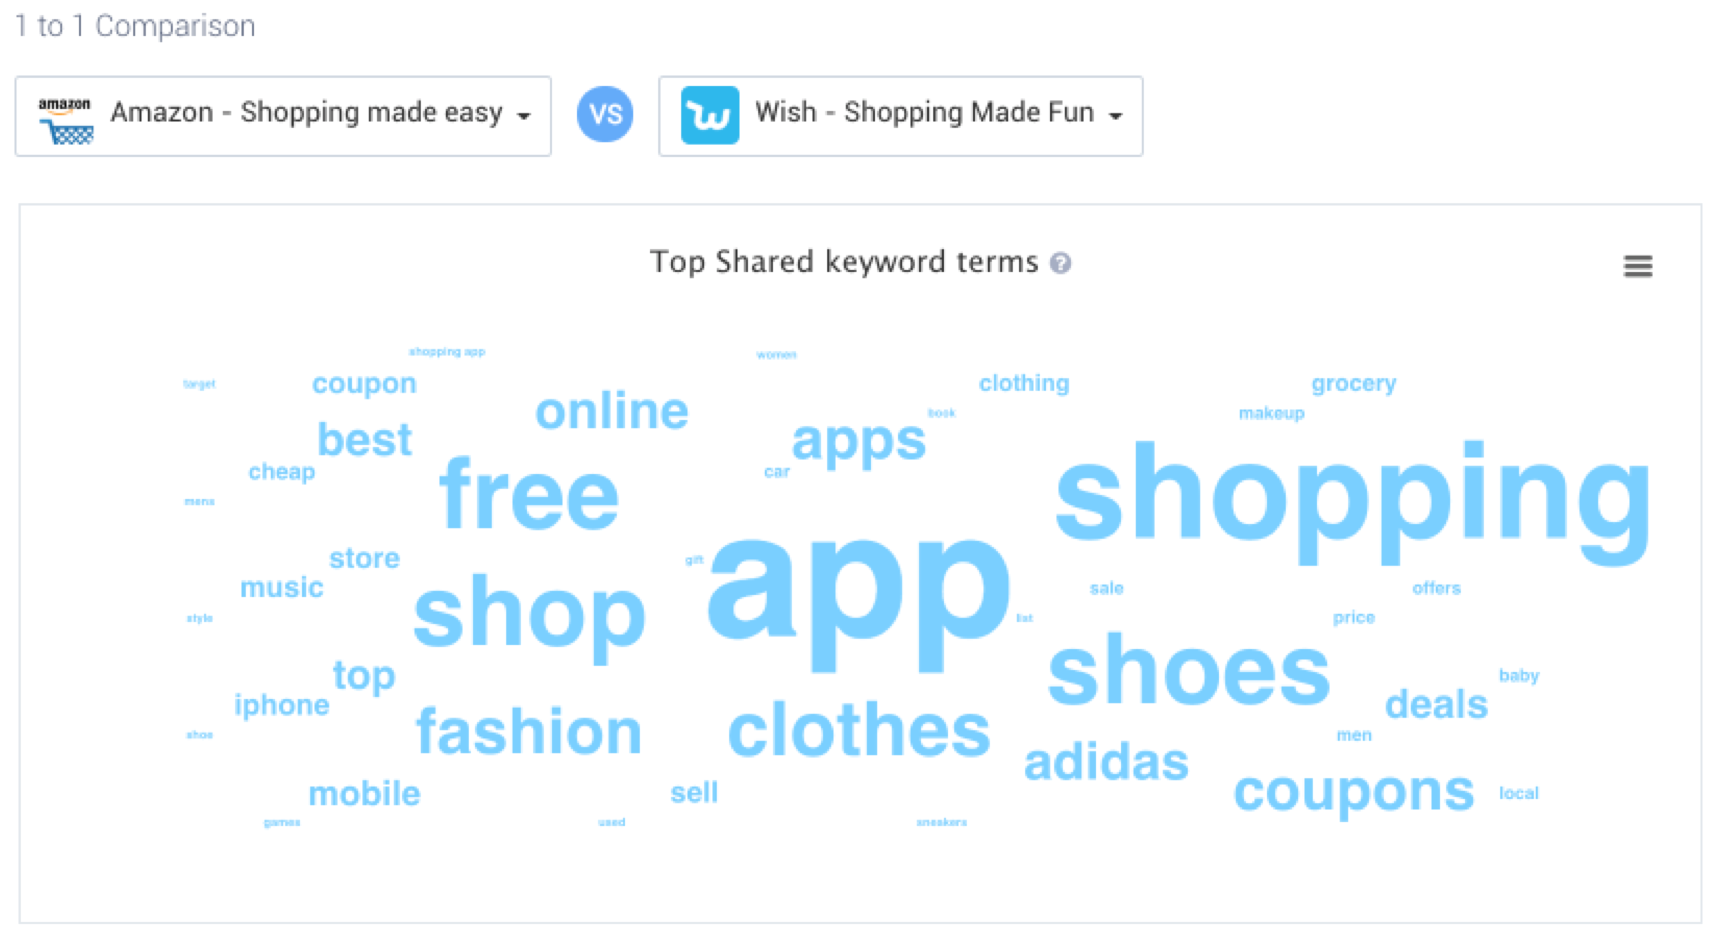 Amazon Shopping and Wish most shared bidding terms - IOS US 